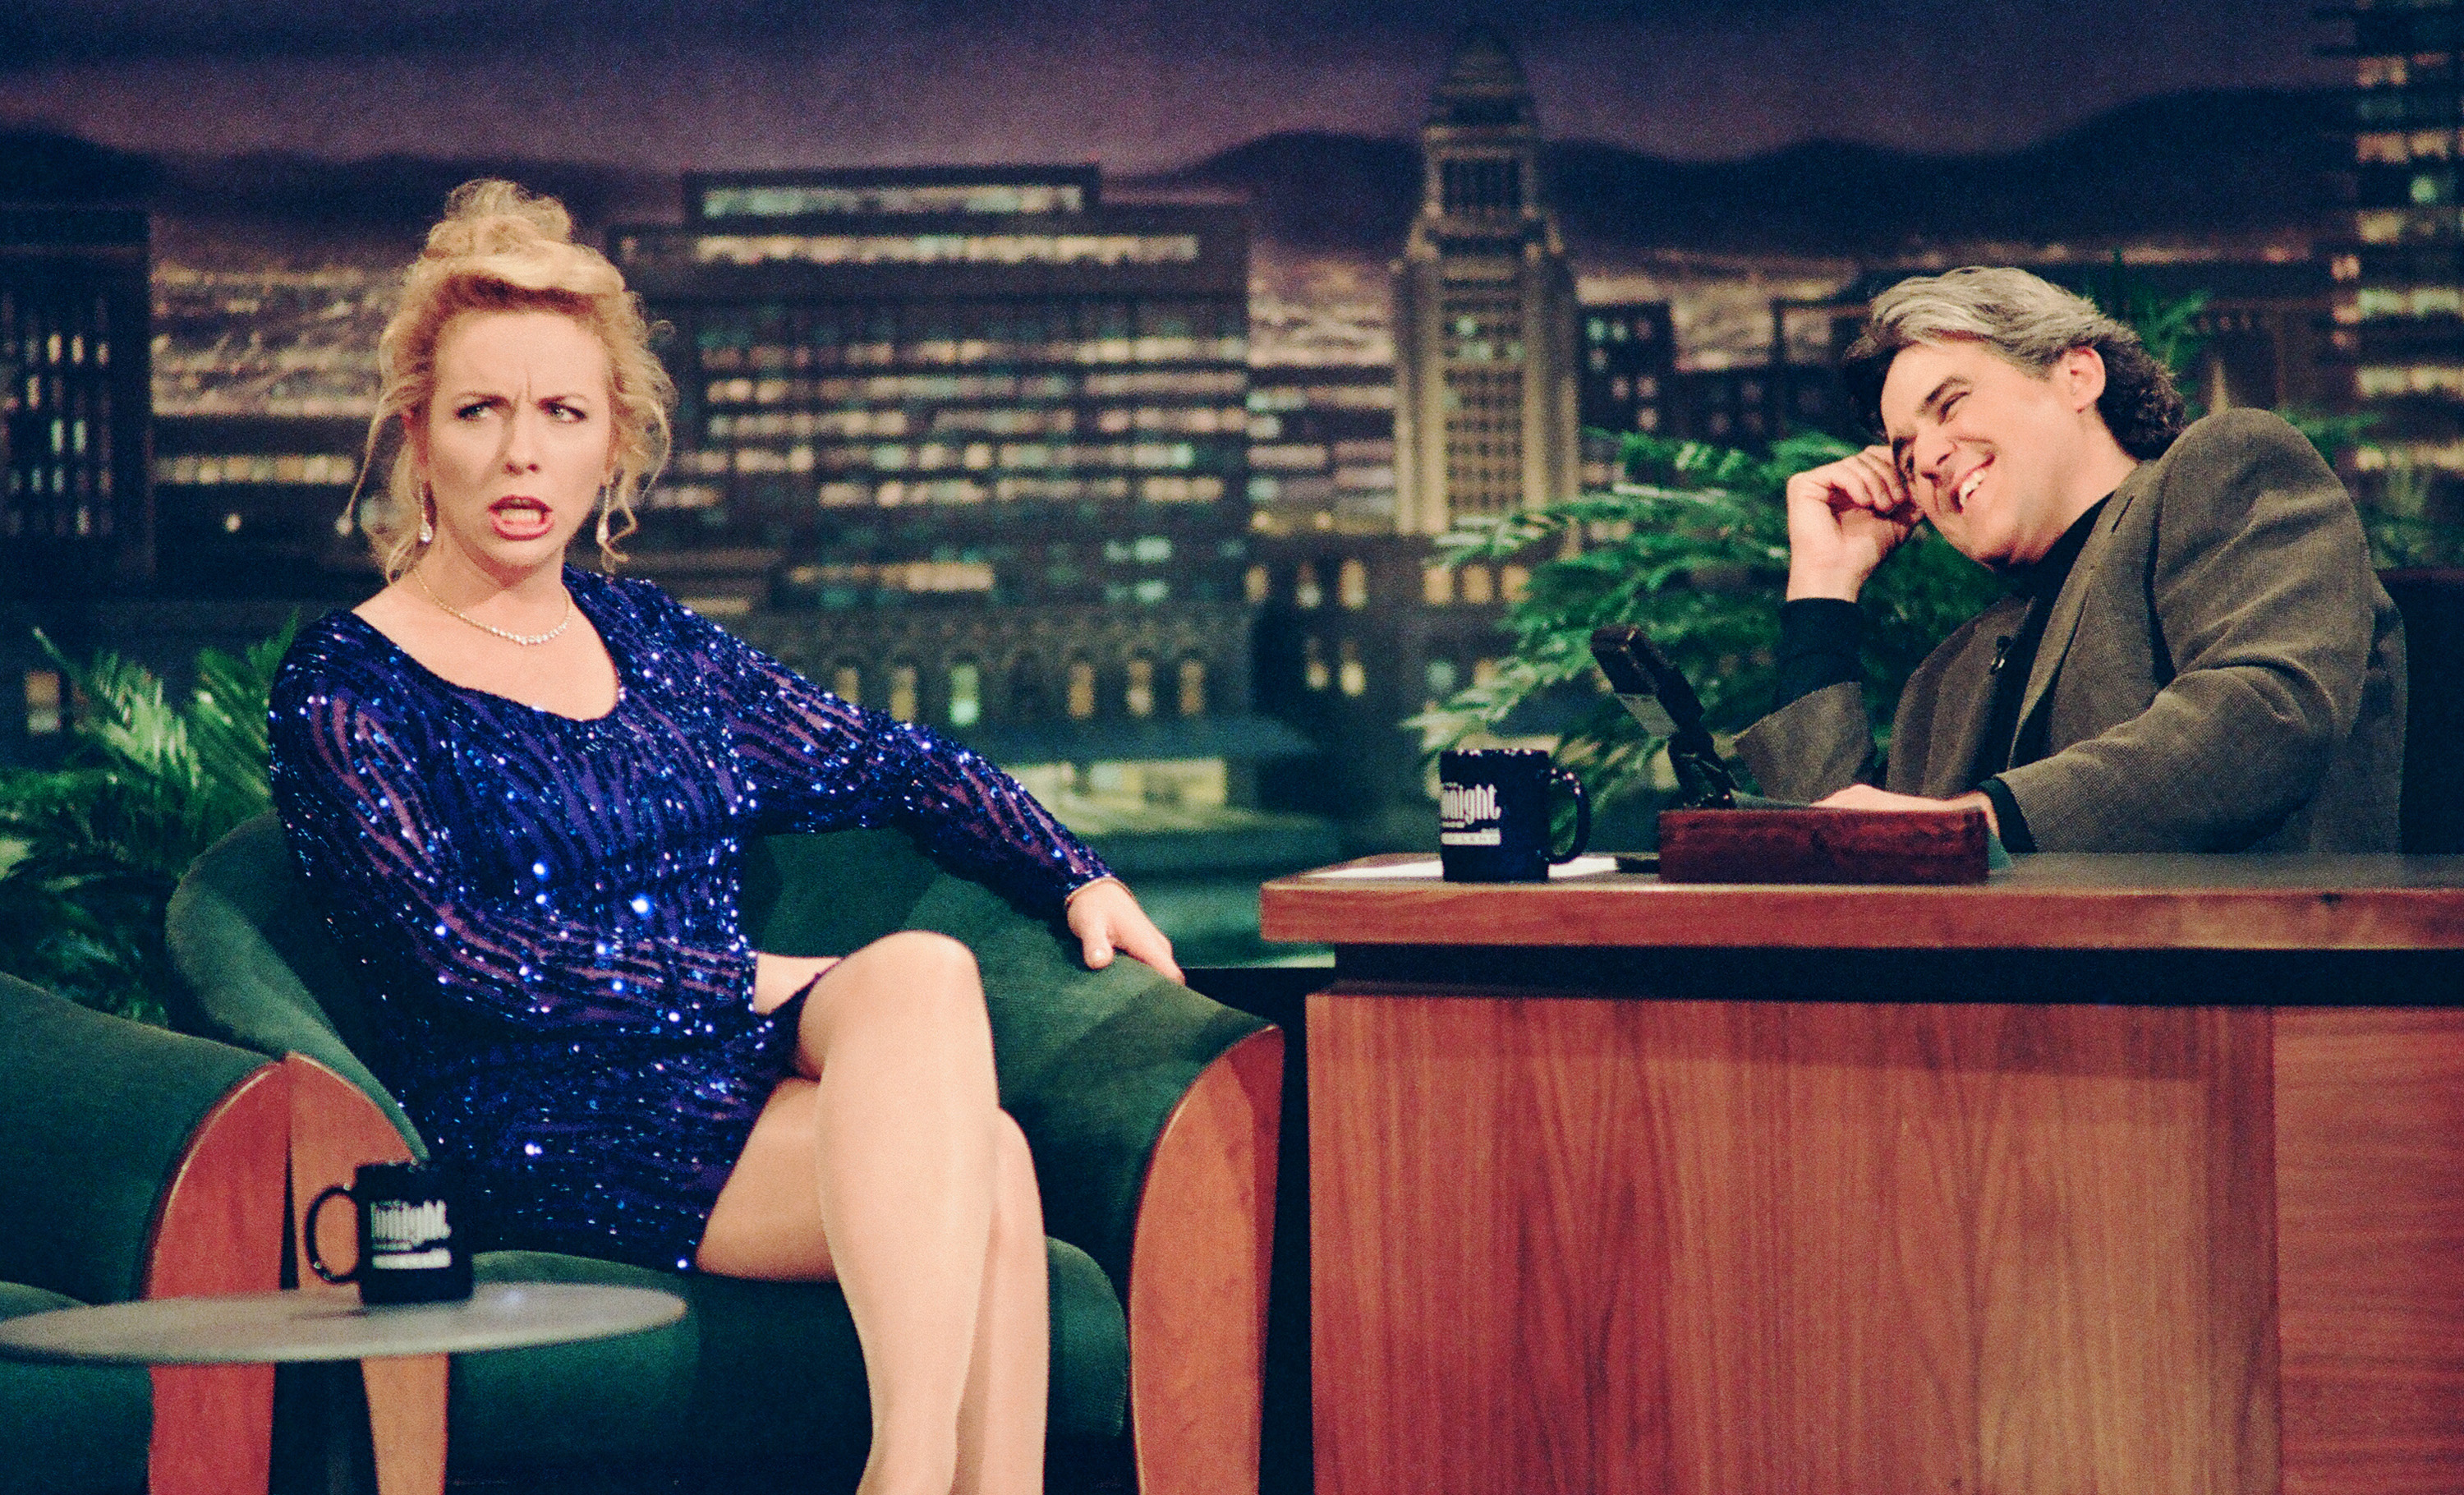 Brett Butler during an interview with host Jay Leno on May 24, 1994, in "The Tonight Show with Jay Leno" | Source: Getty Images